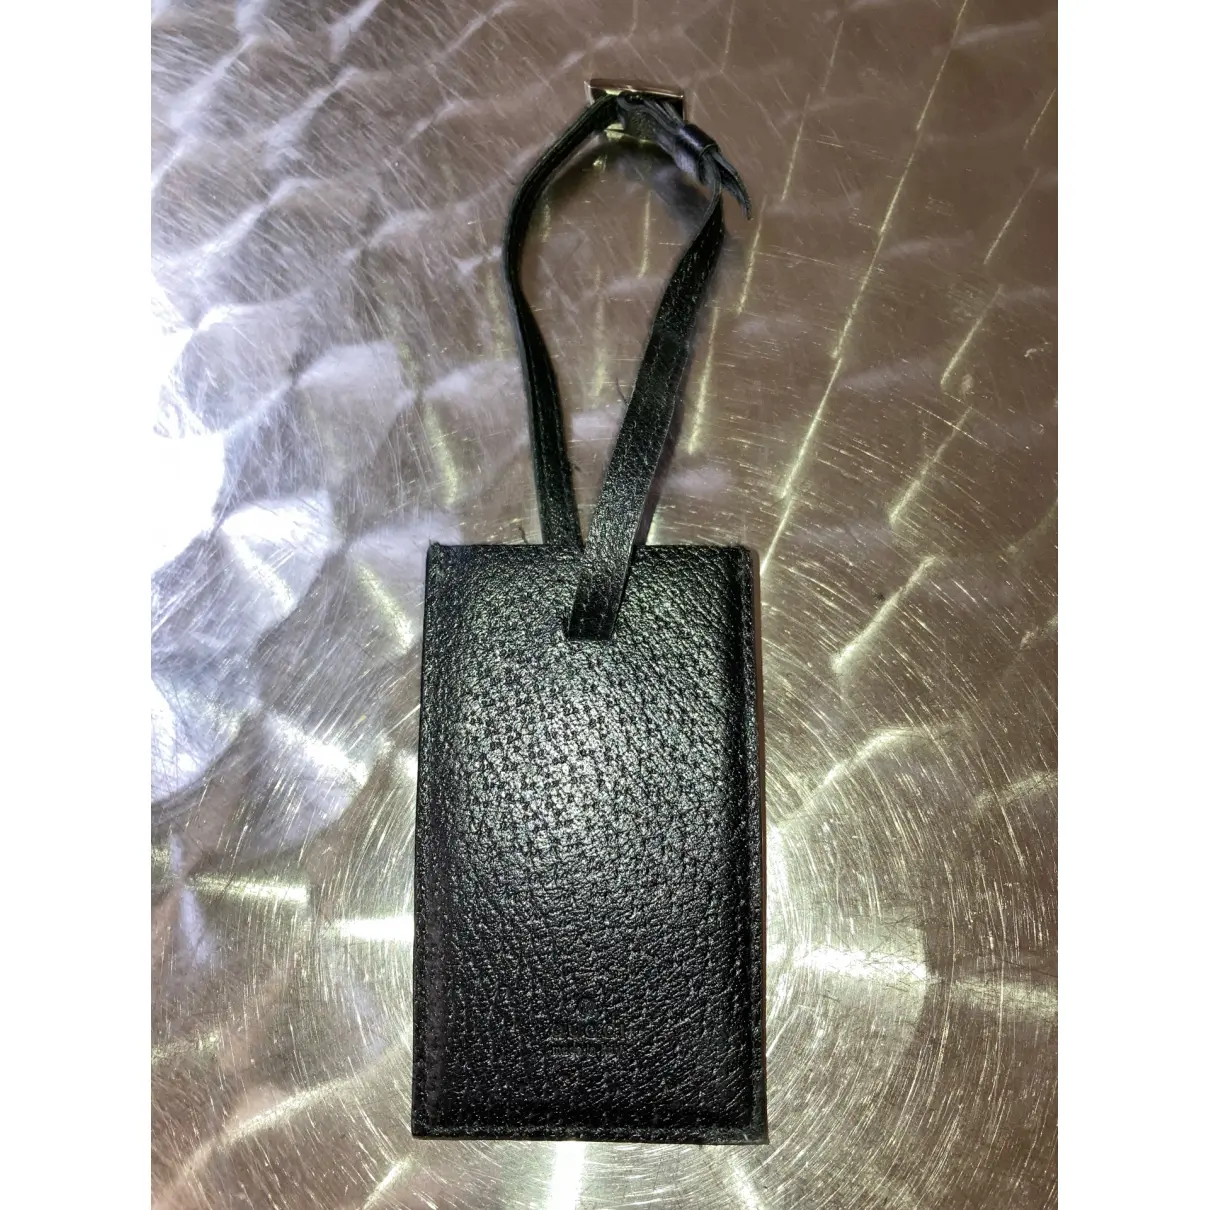 Buy Gucci Leather purse online